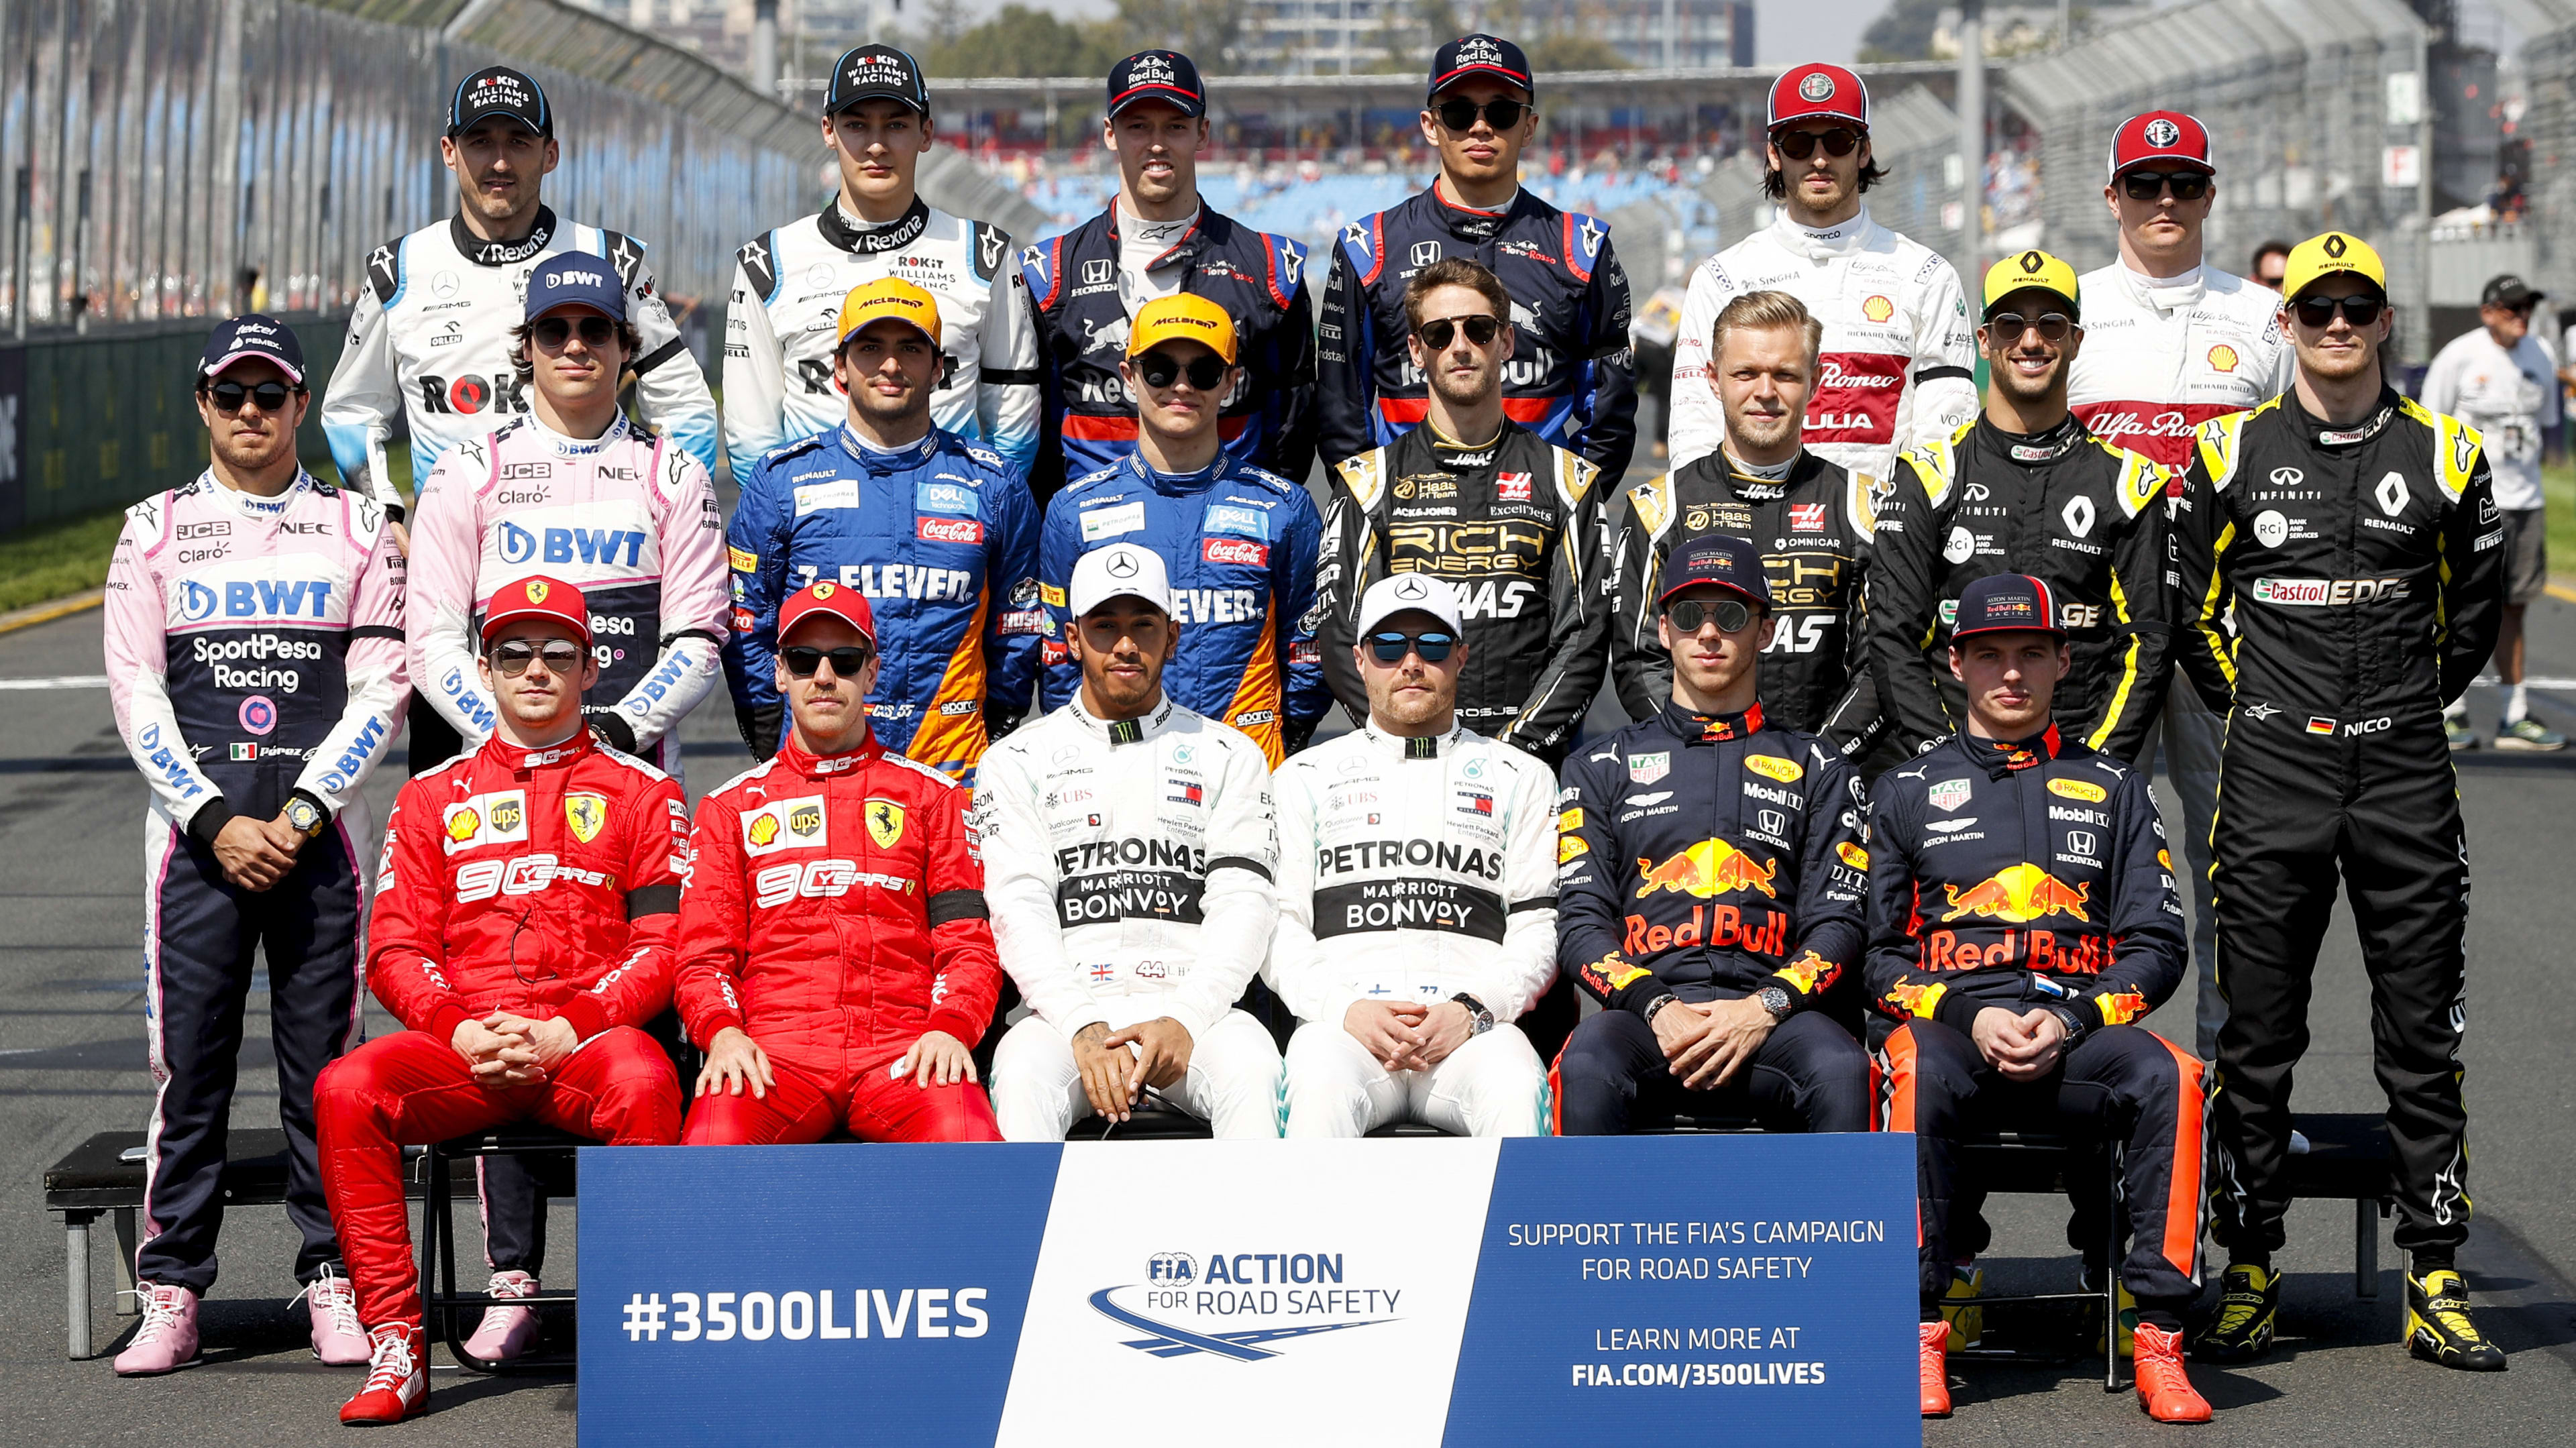 2019 F1 driver line-ups Vote for which team has the best driver pairing on the grid this season? Formula 1®